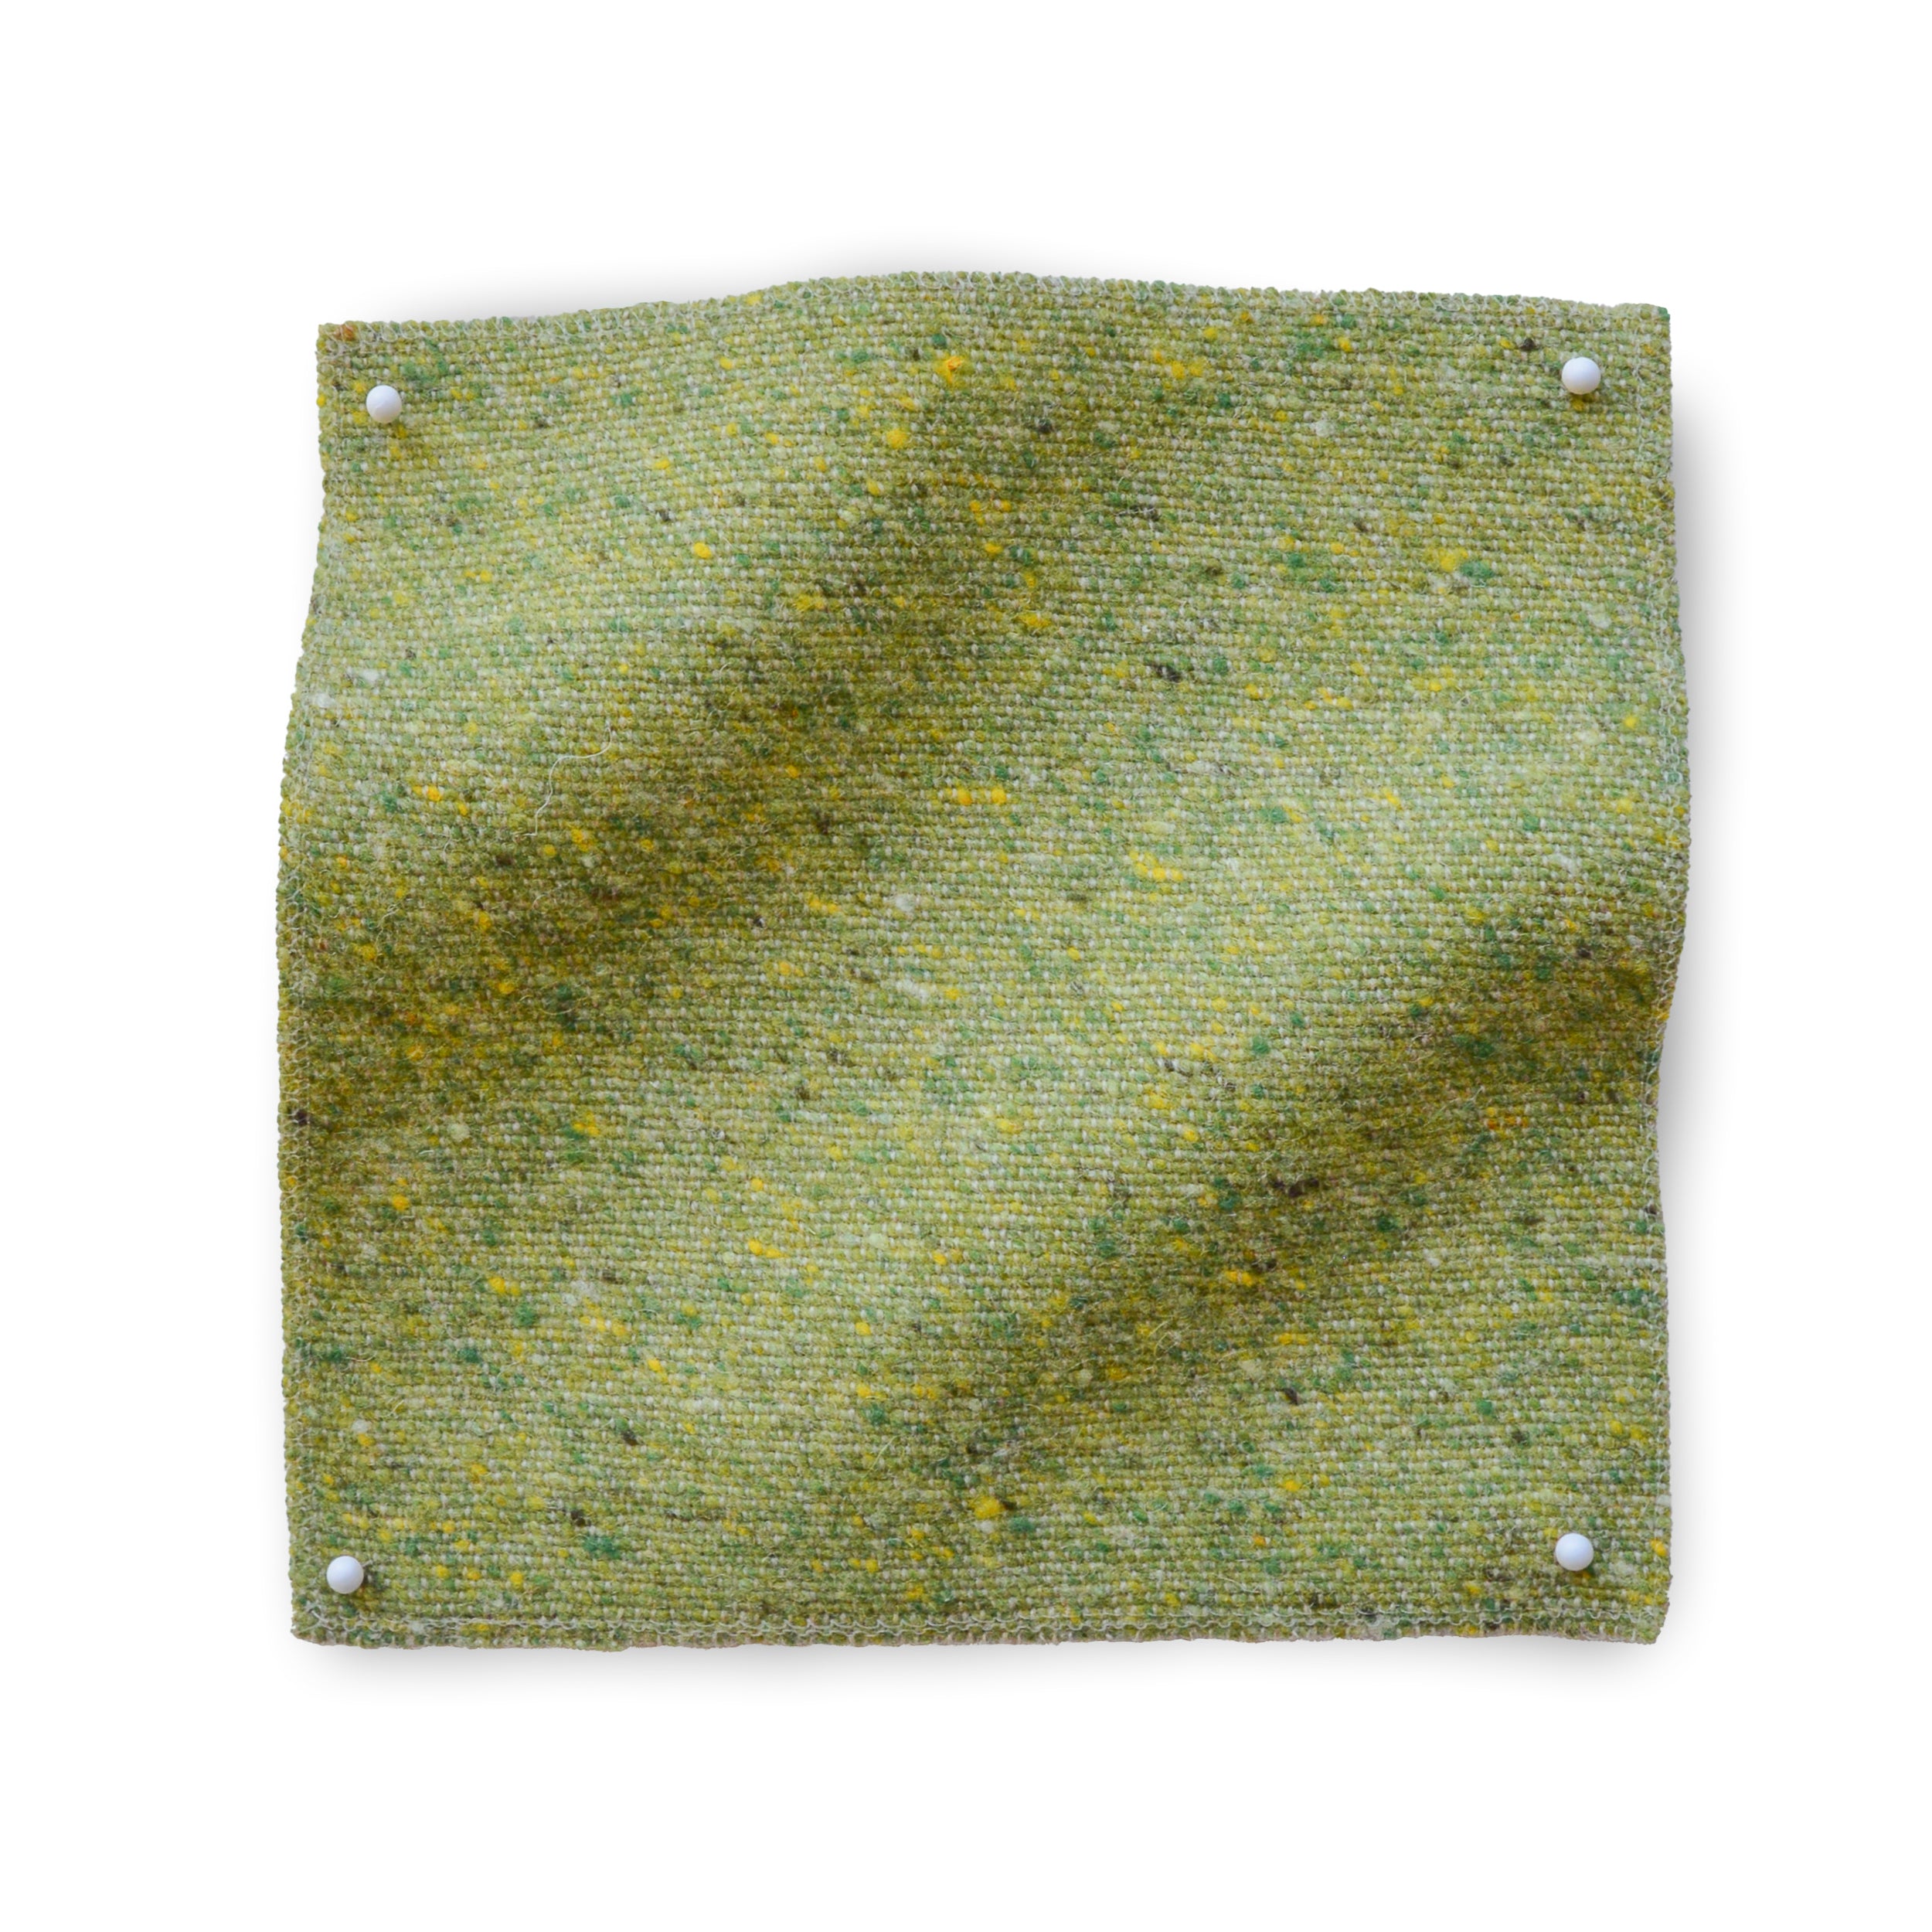 Square fabric swatch of heathered wool in a light green colorway.